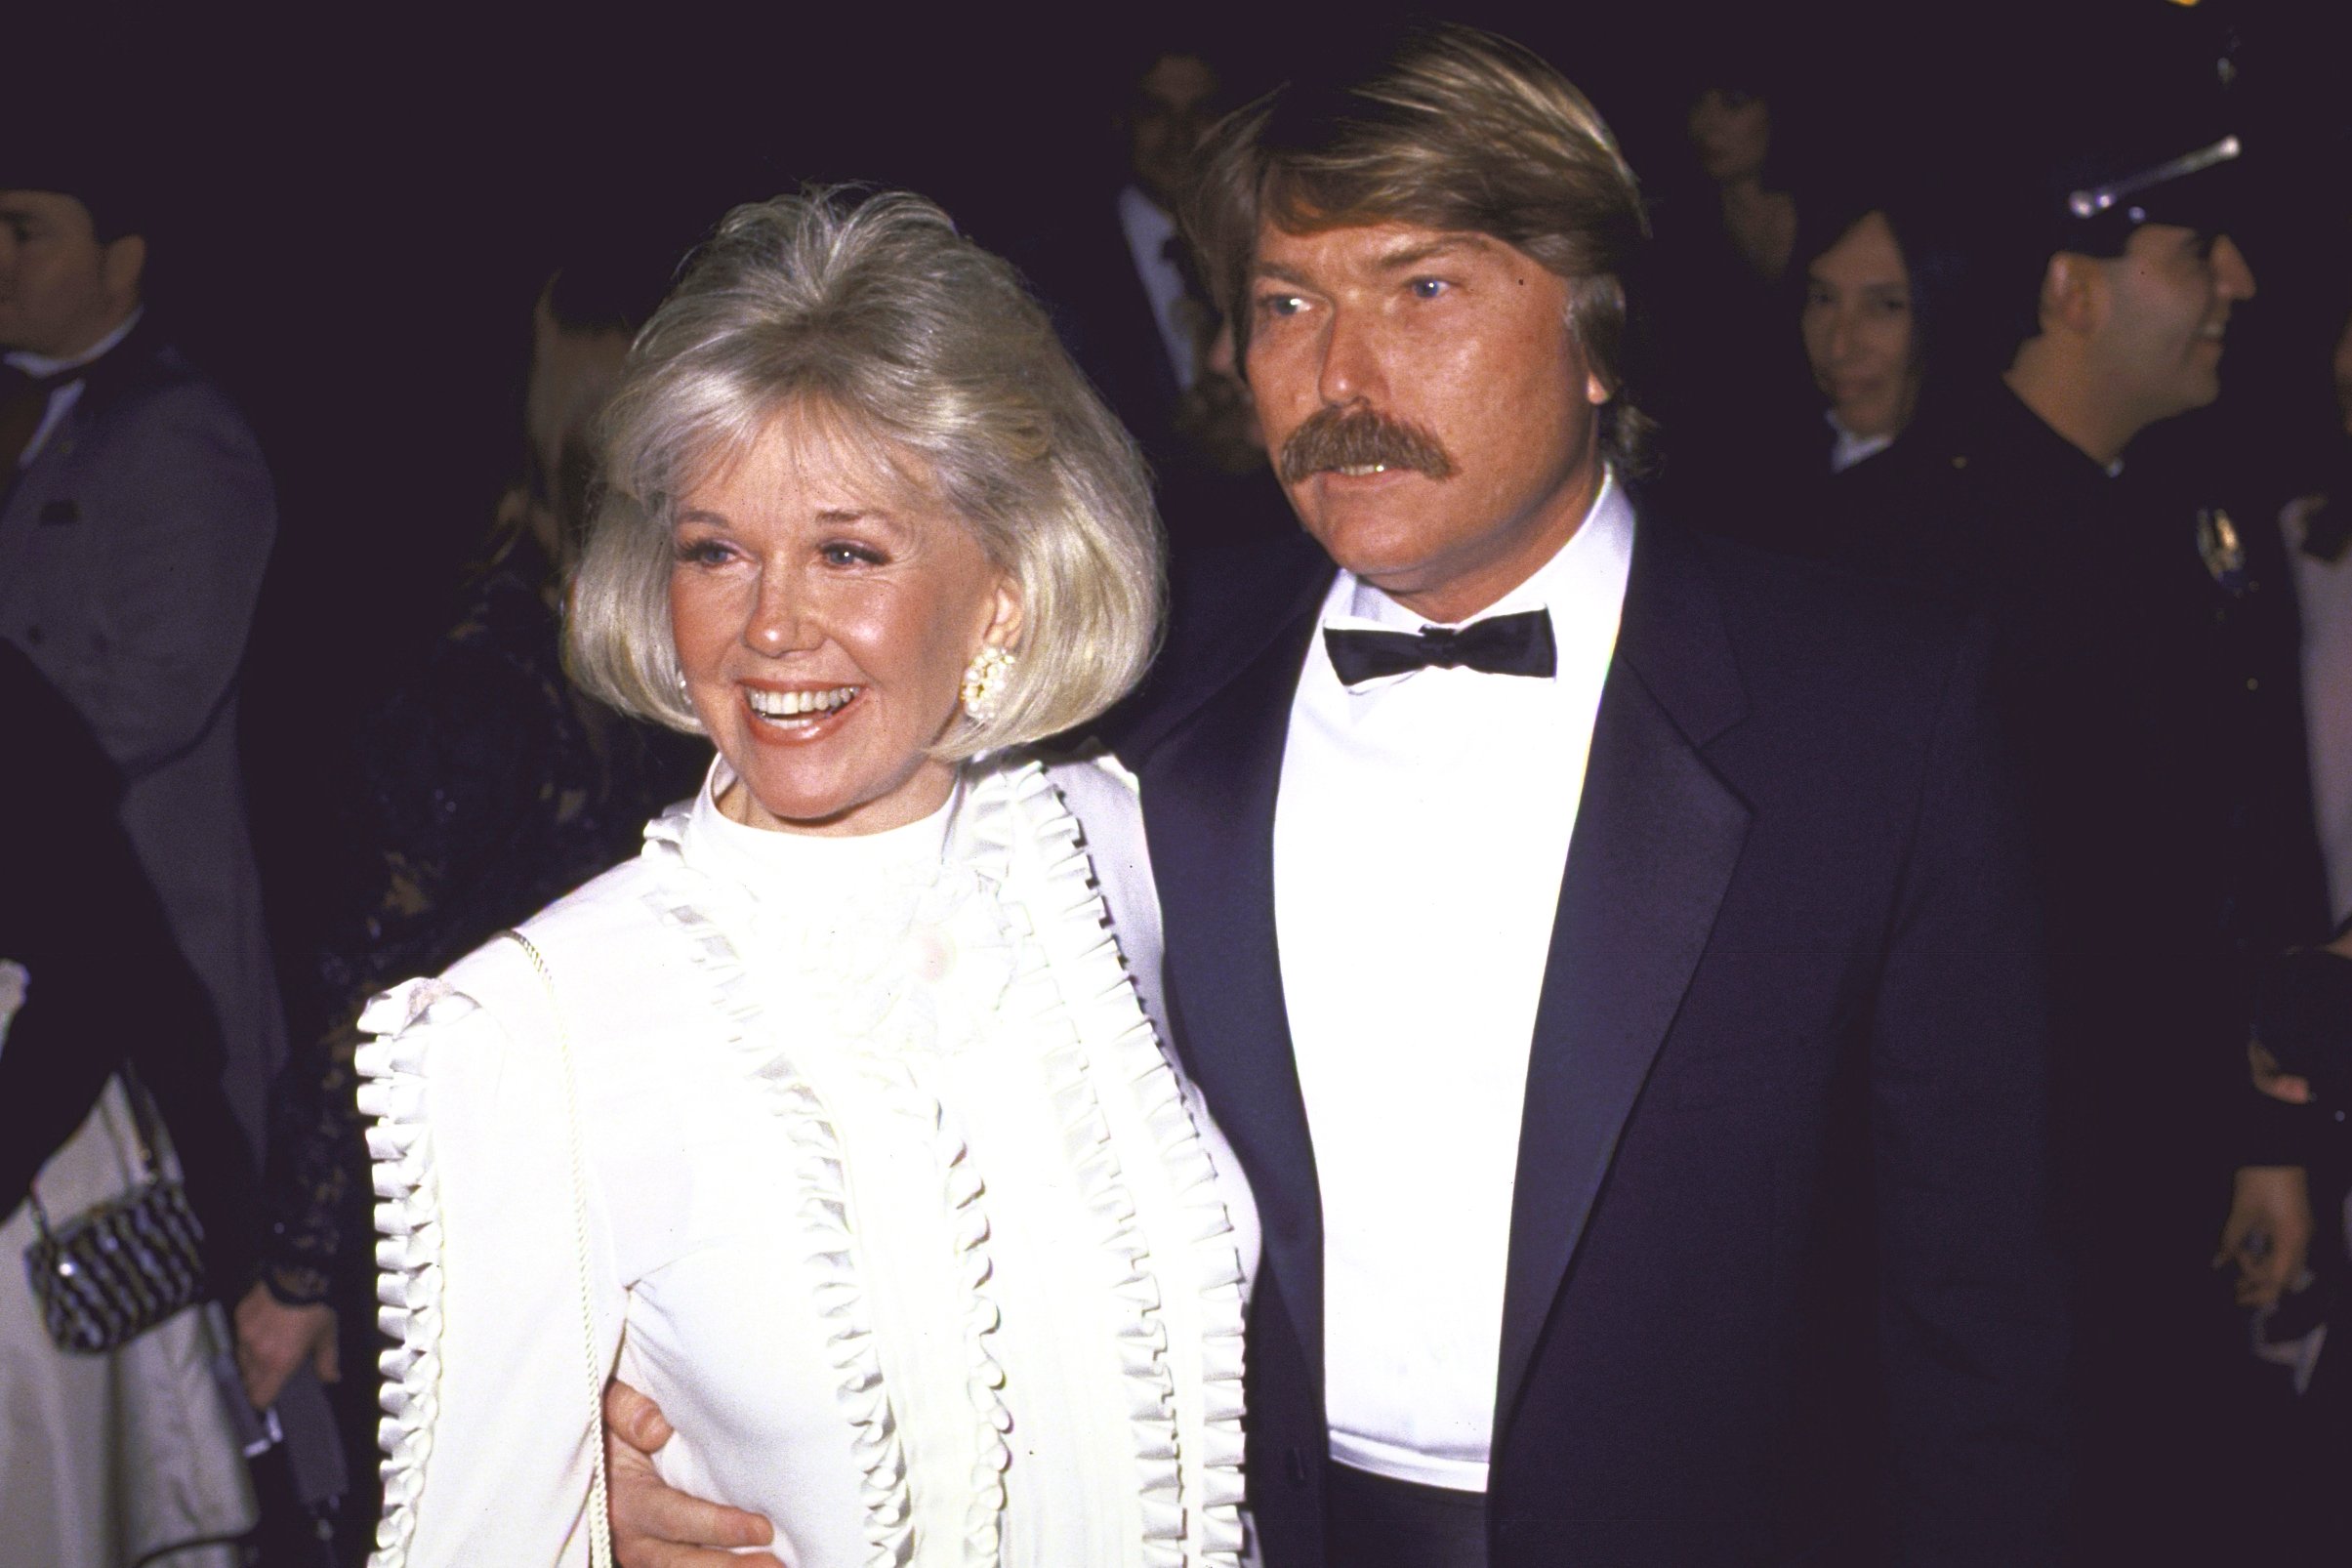 Doris Day pictured with her one and only child, son Terry Melcher who was a record producer. / Source: Getty Images